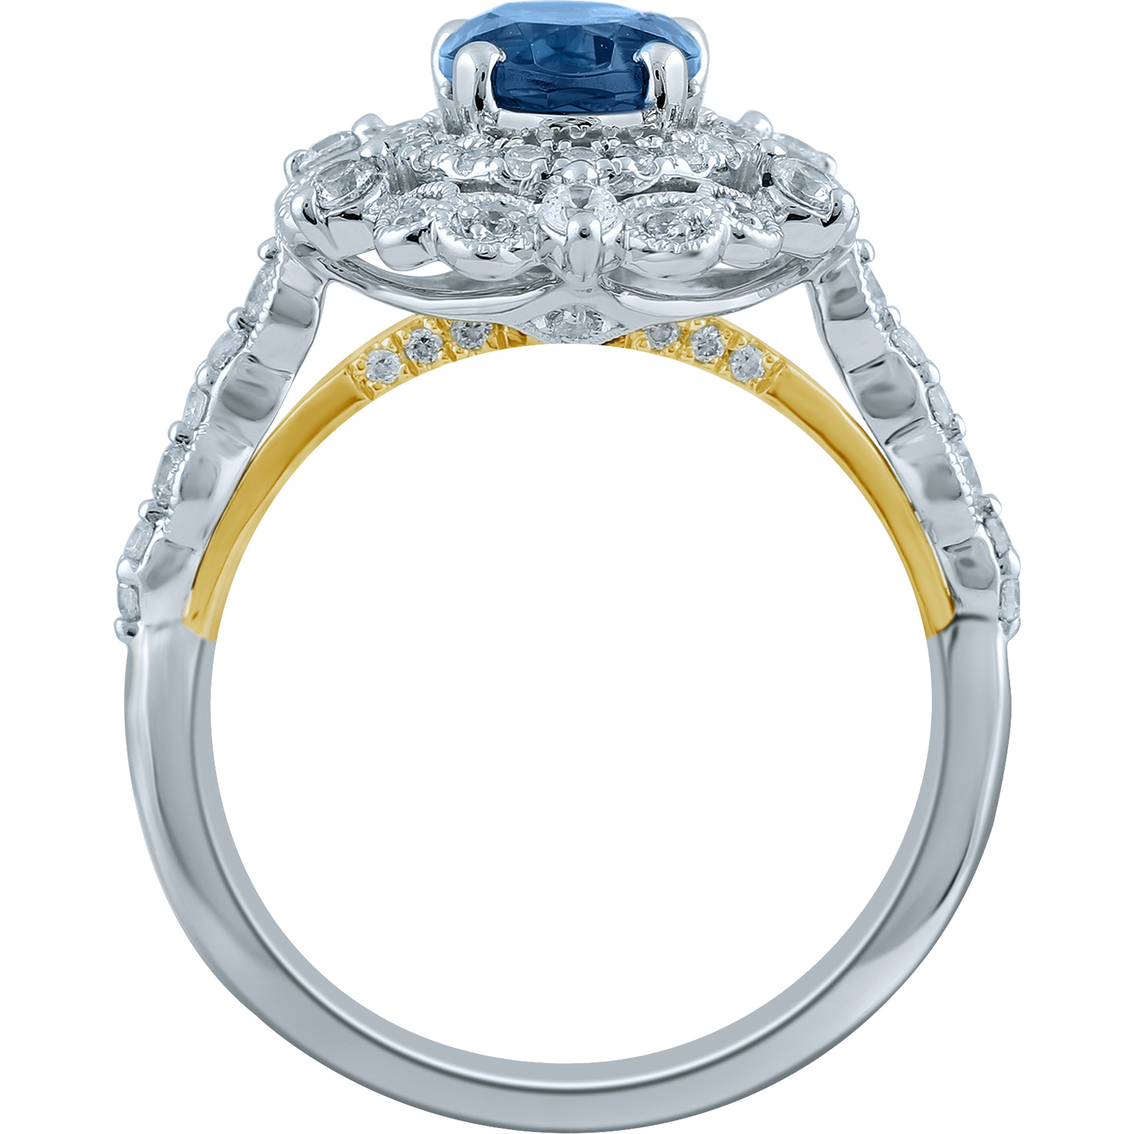 Truly Zac Posen 14K Two Tone Gold 2 CTW London Blue and Diamond Engagement Ring - Image 2 of 3